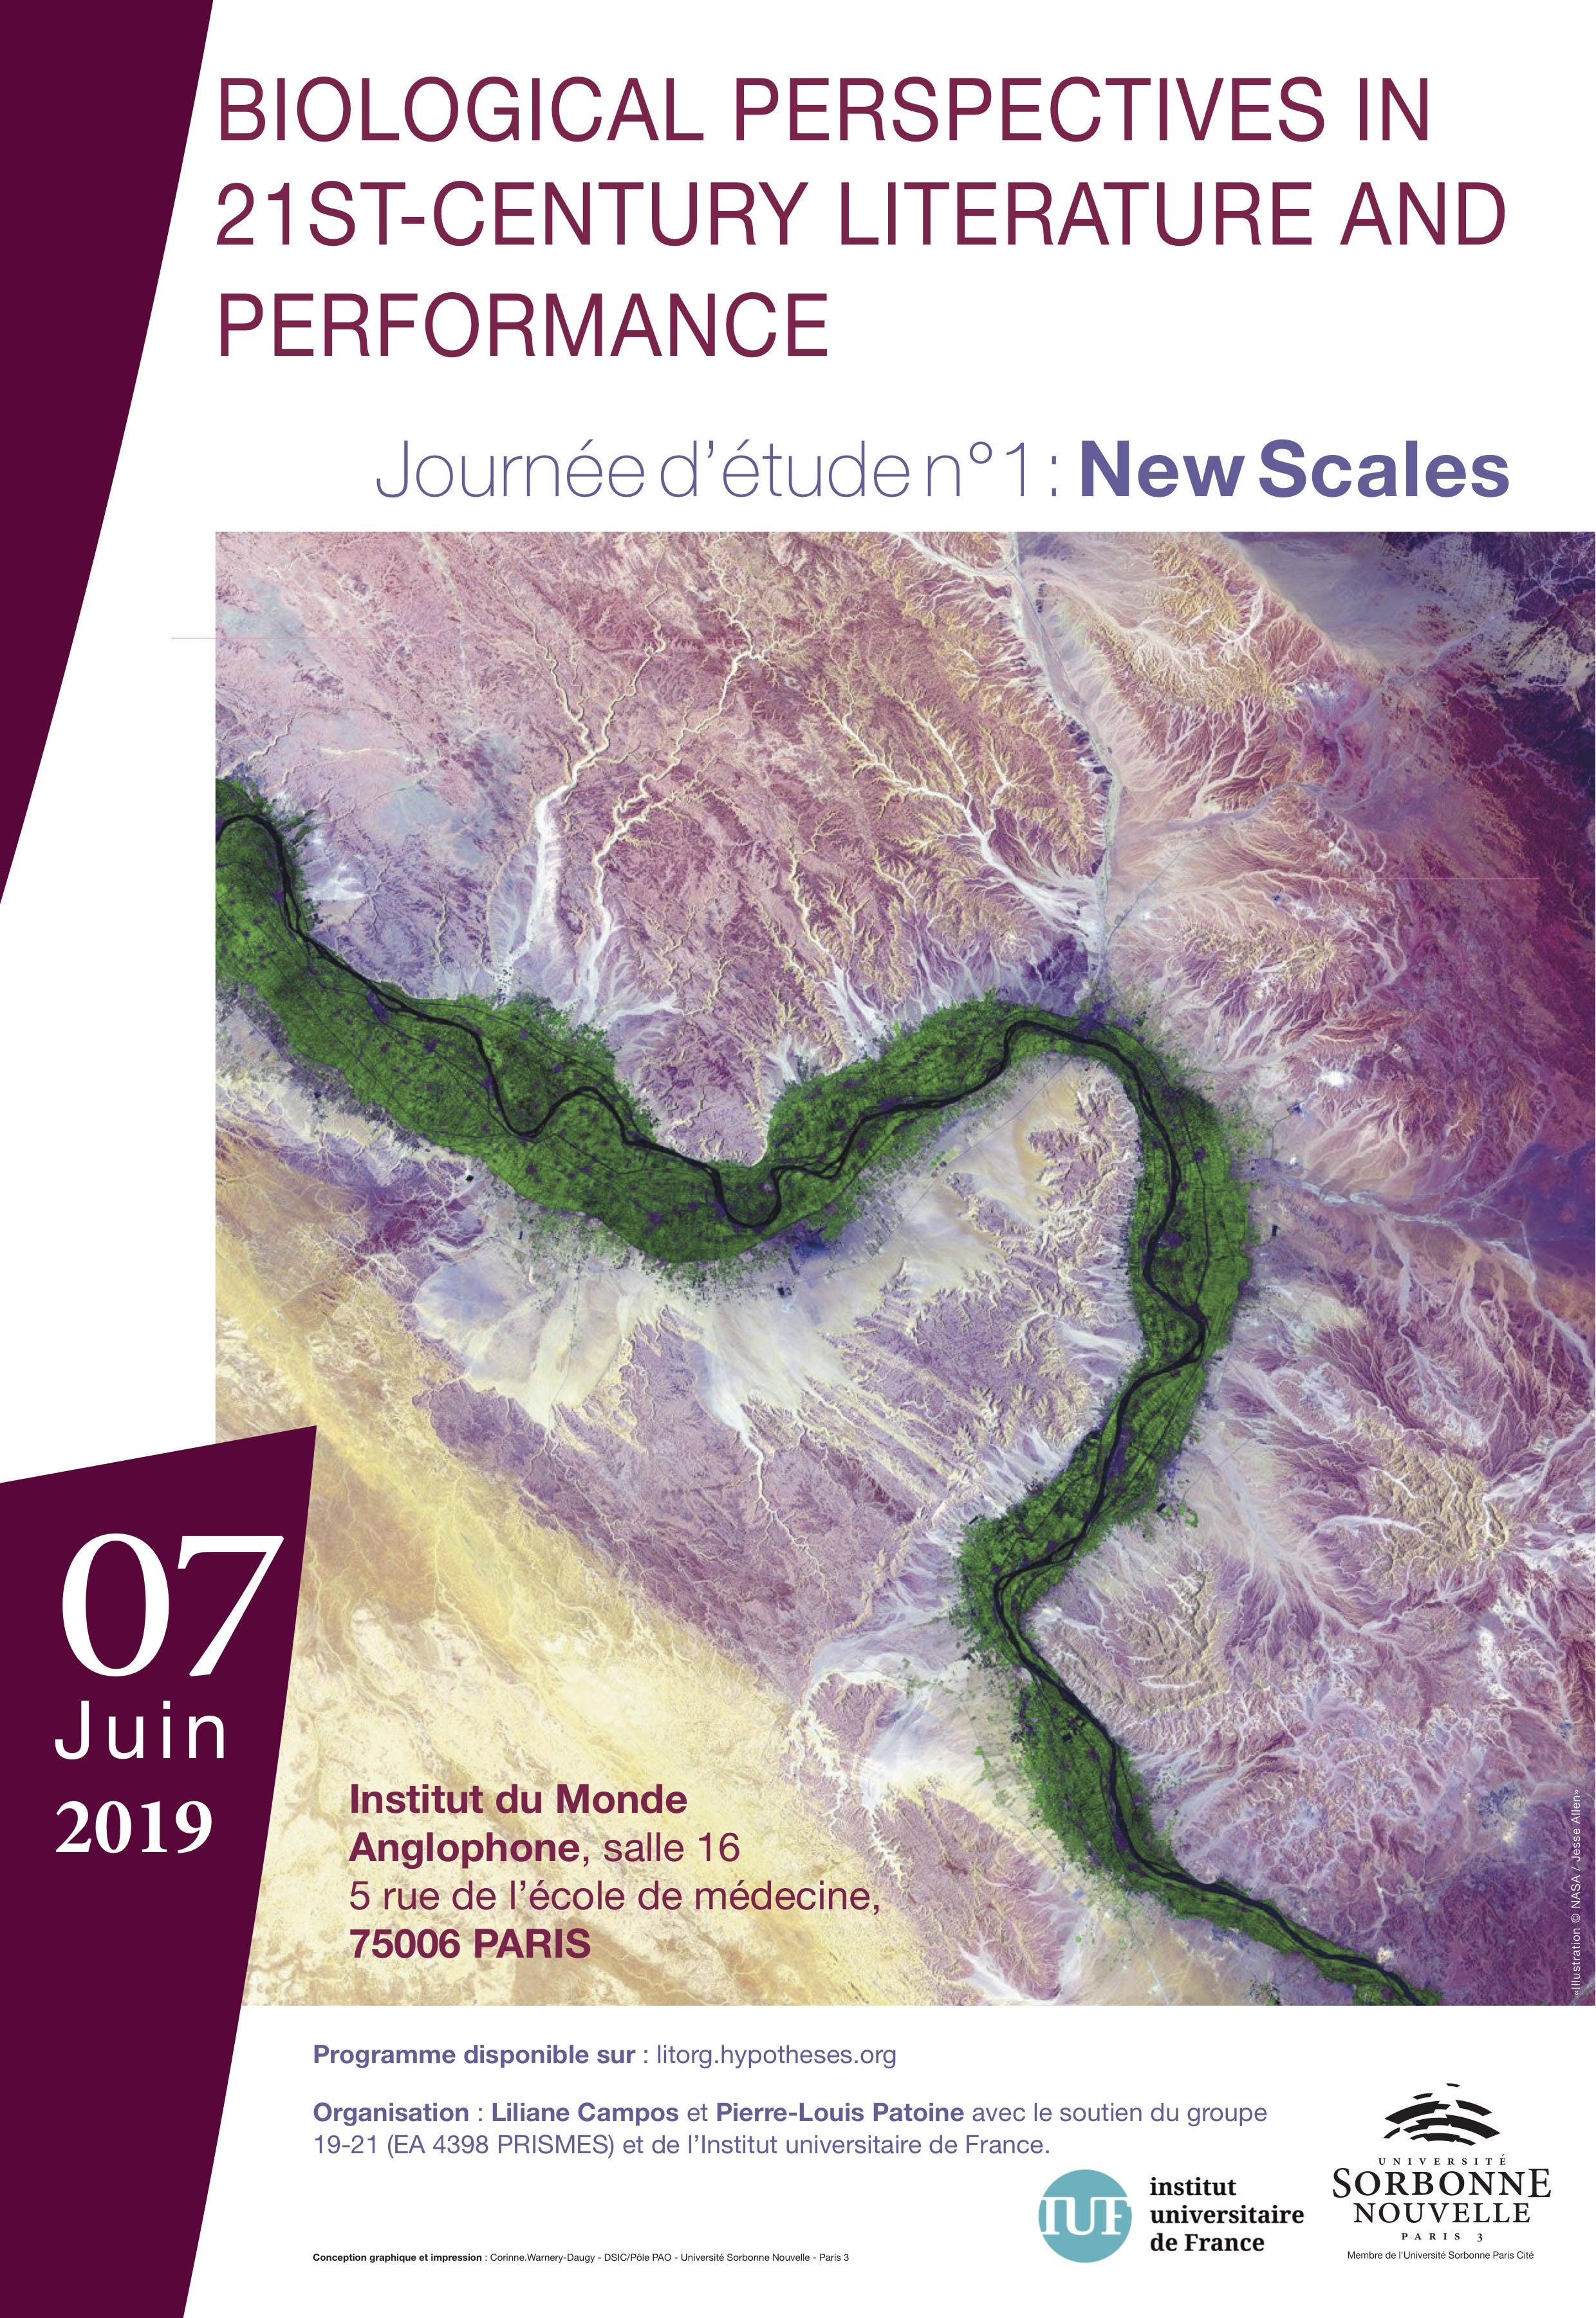 Biological Perspectives in 21st century Literature and Performance – Symposium number 1: New Scales. June 7, 2019